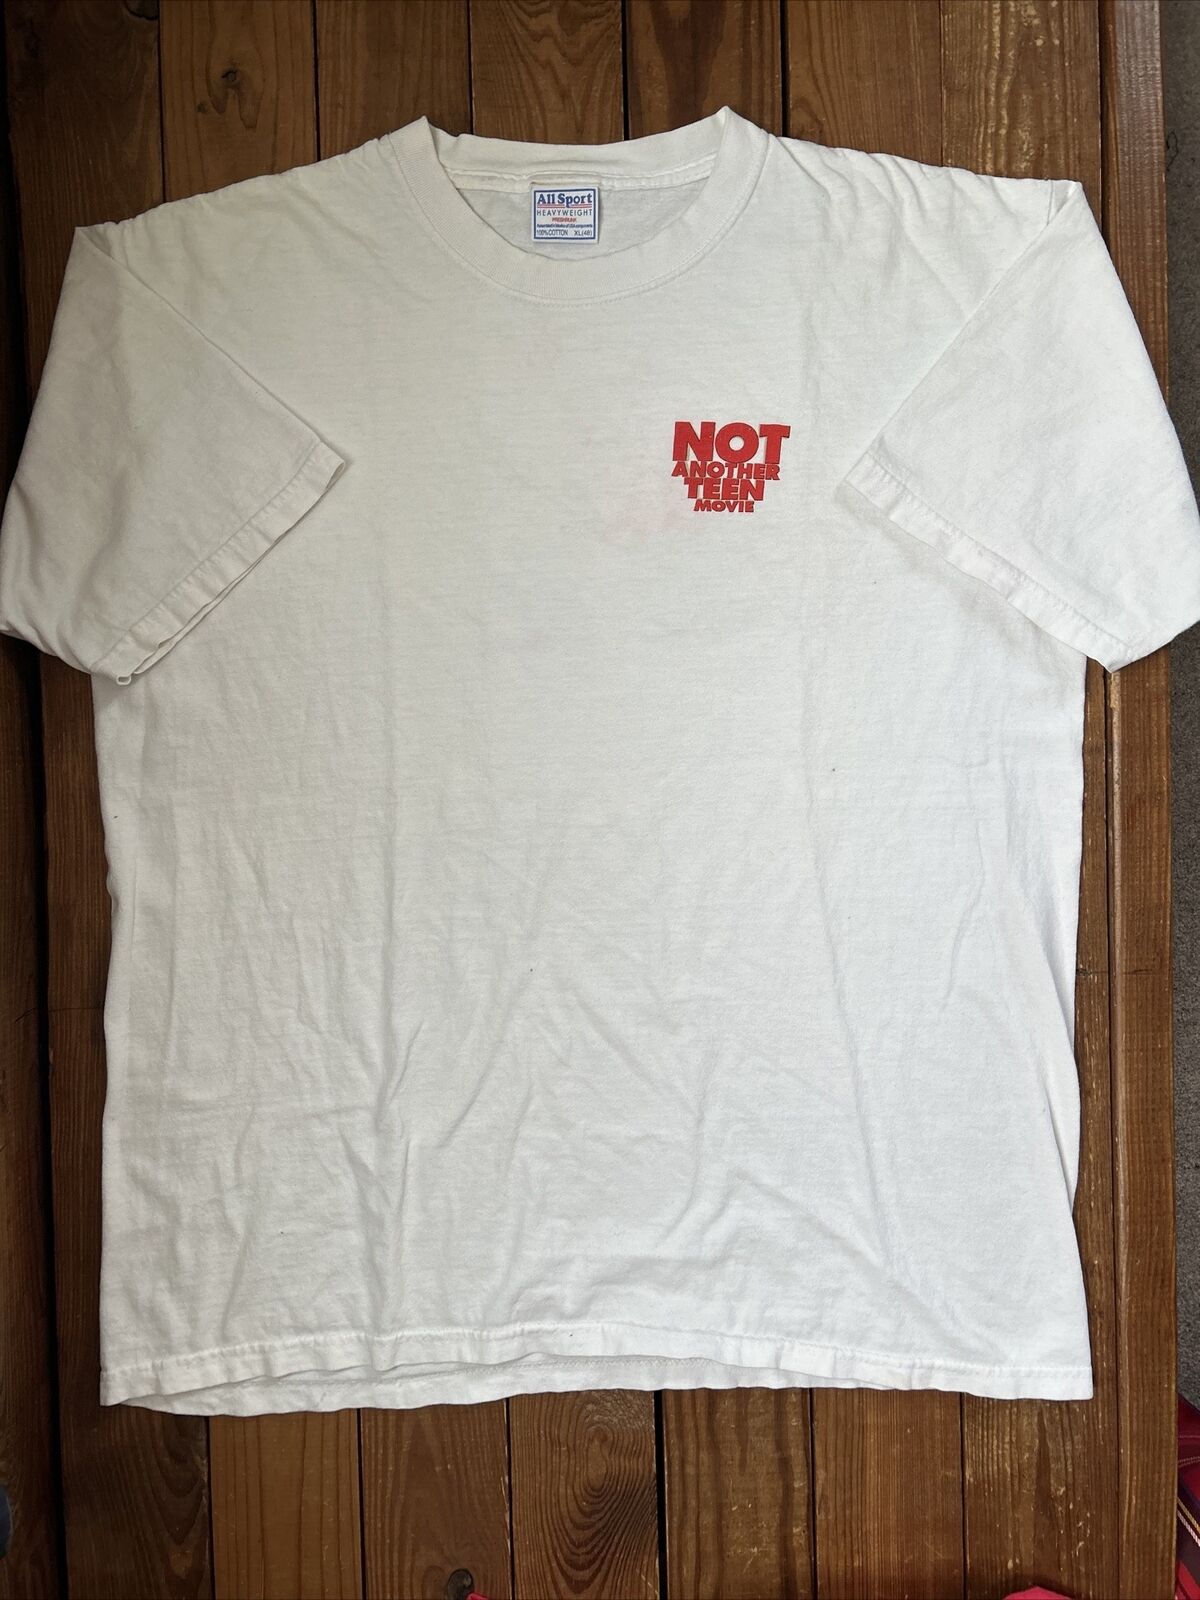 Vintage 2001 Not Another Teen Movie White Promo T-Shirt Size XL